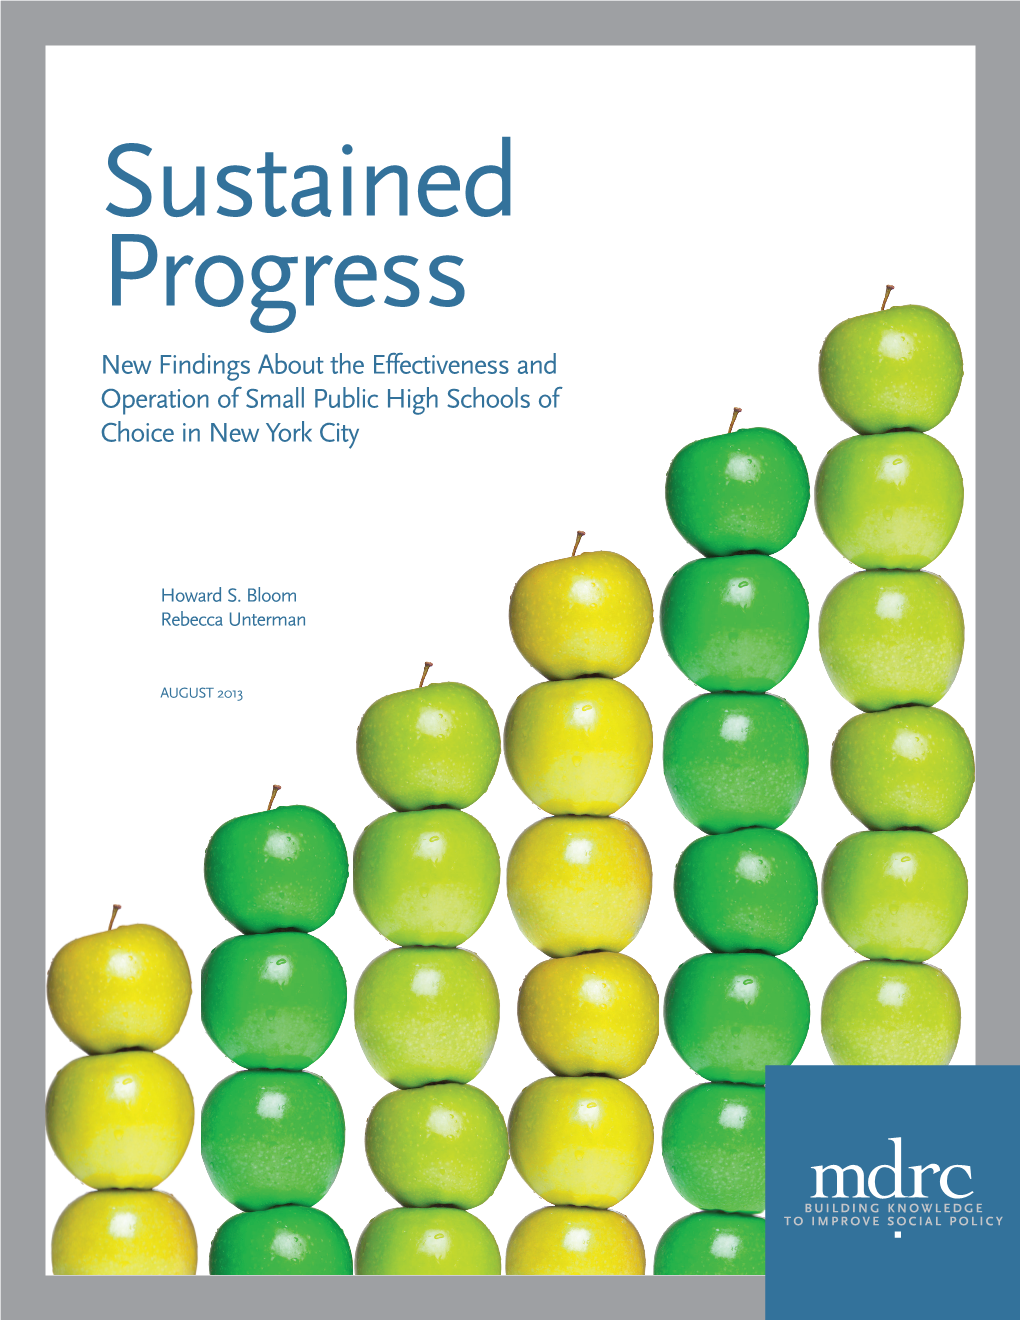 Sustained Progress New Findings About the Effectiveness and Operation of Small Public High Schools of Choice in New York City